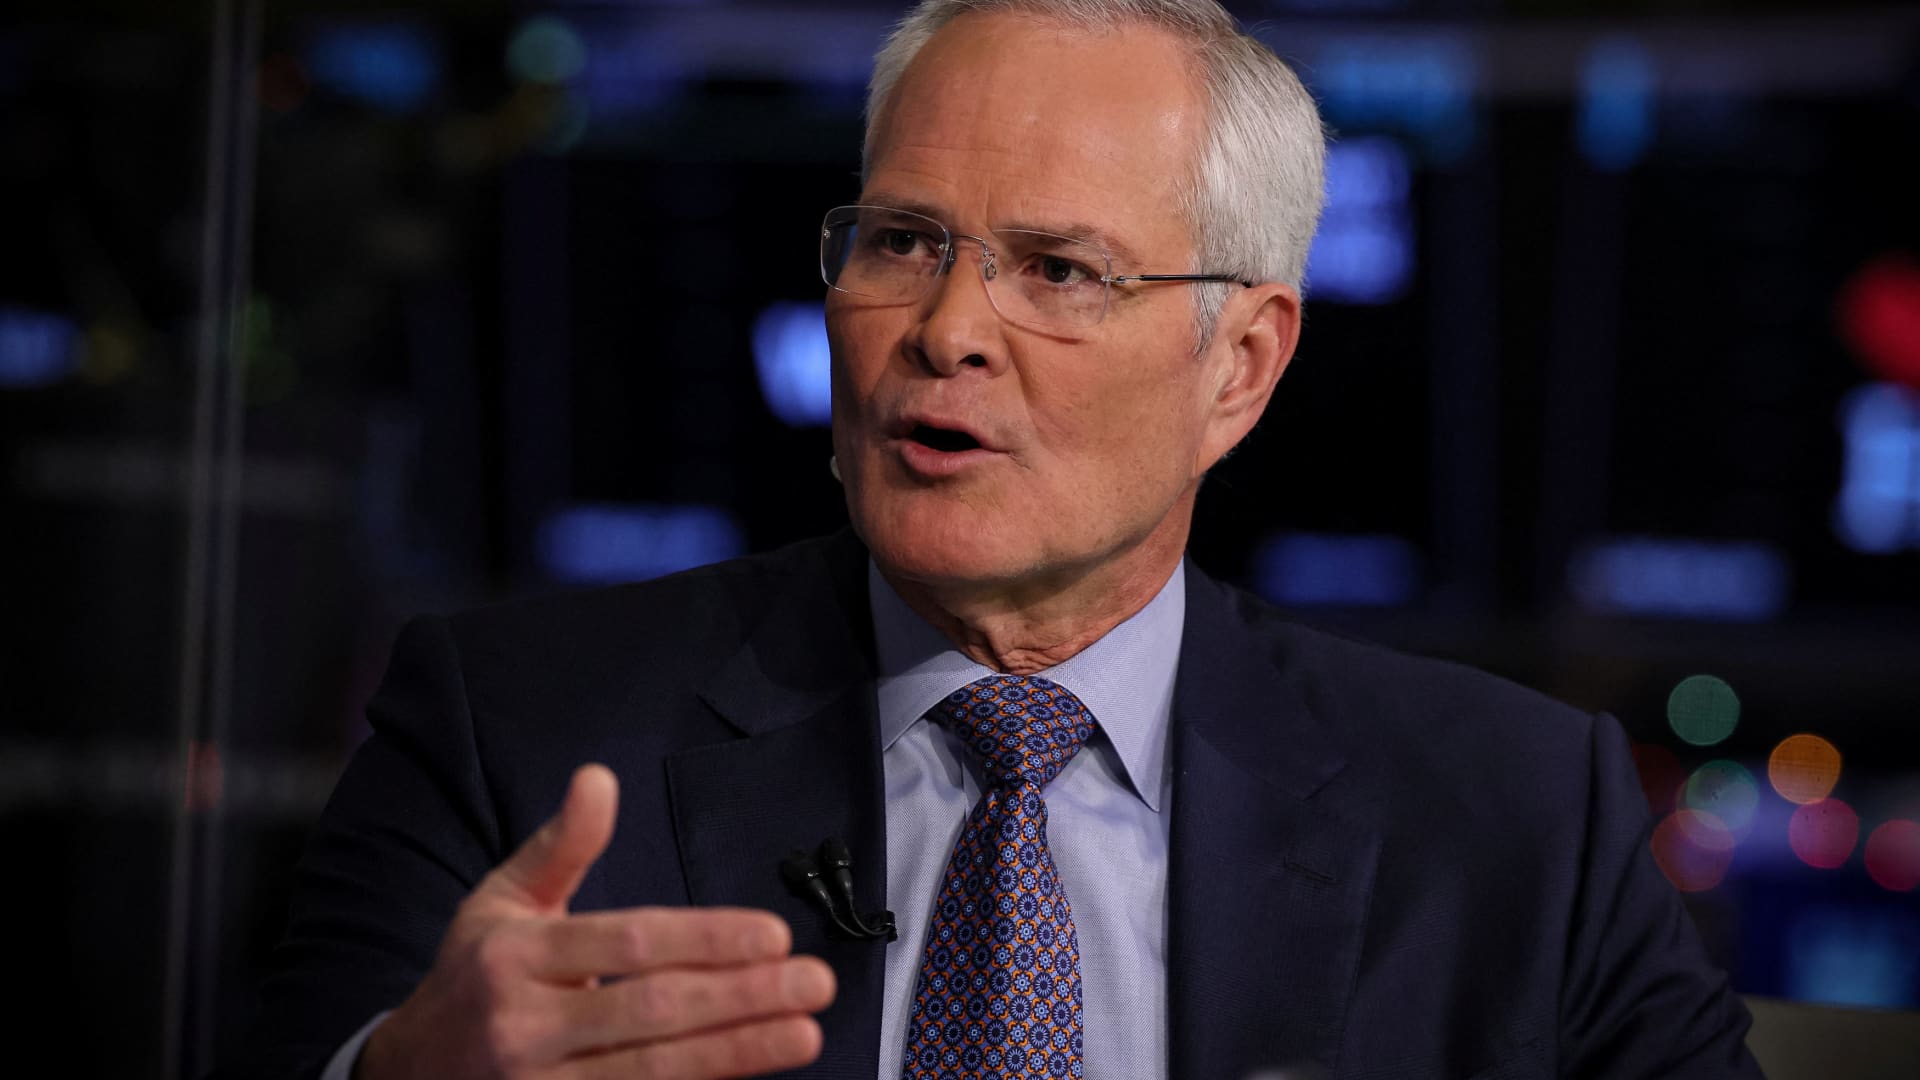 Exxon CEO dismisses worries FTC could hold up Pioneer deal, does not see competition concerns